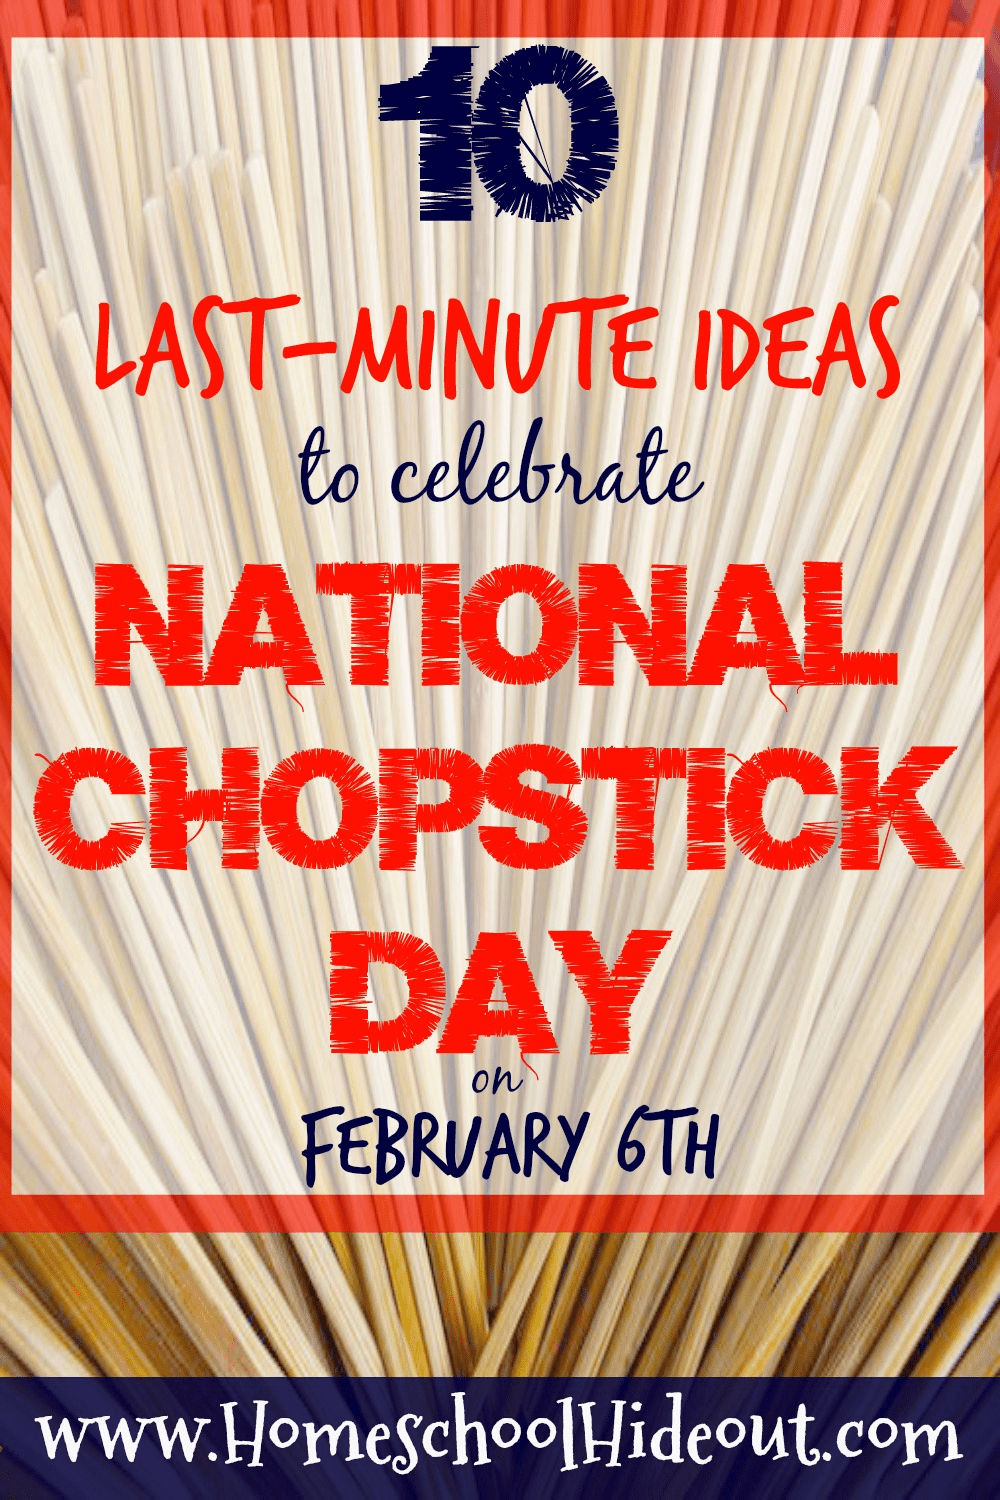 I love when all the work is done for me! This list of 10 last minute ideas to celebrate National Chopstick Day is amazing!